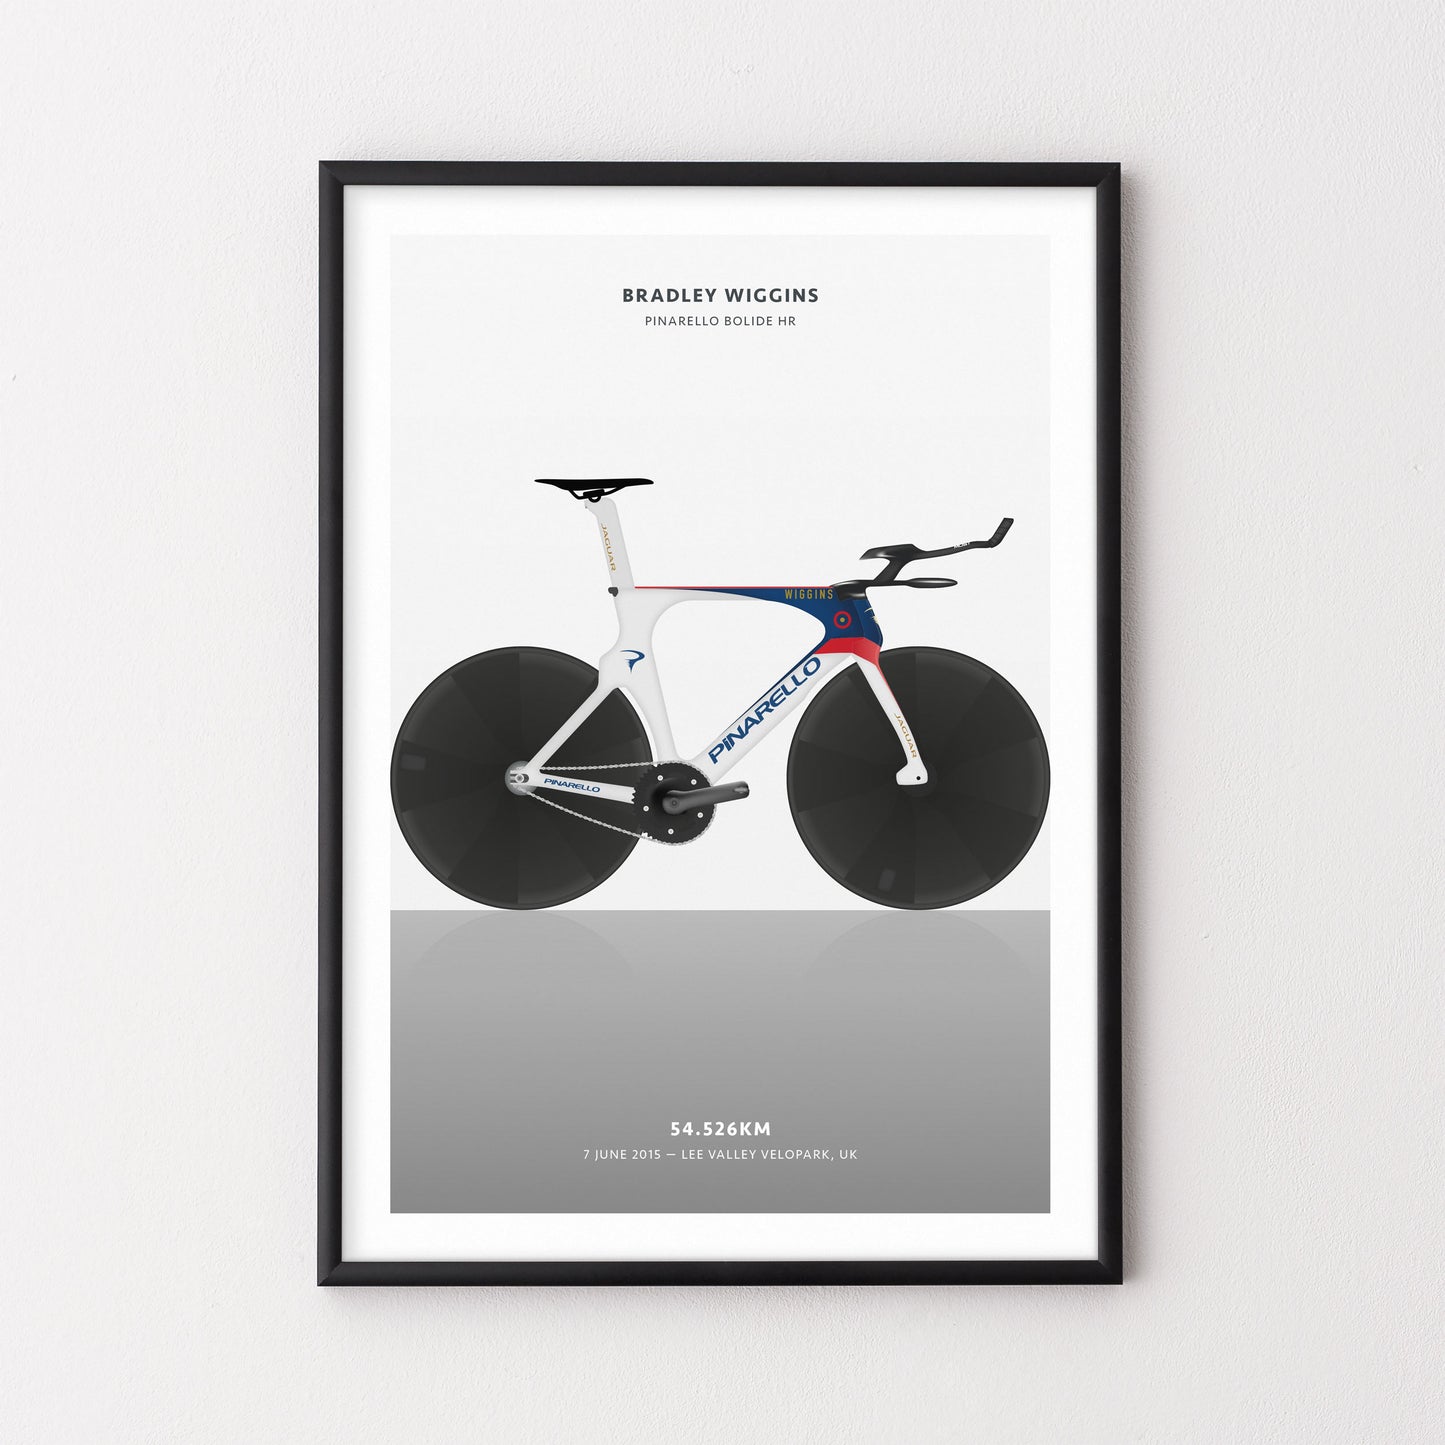 Bradley Wiggins Hour Record – Poster – The English Cyclist